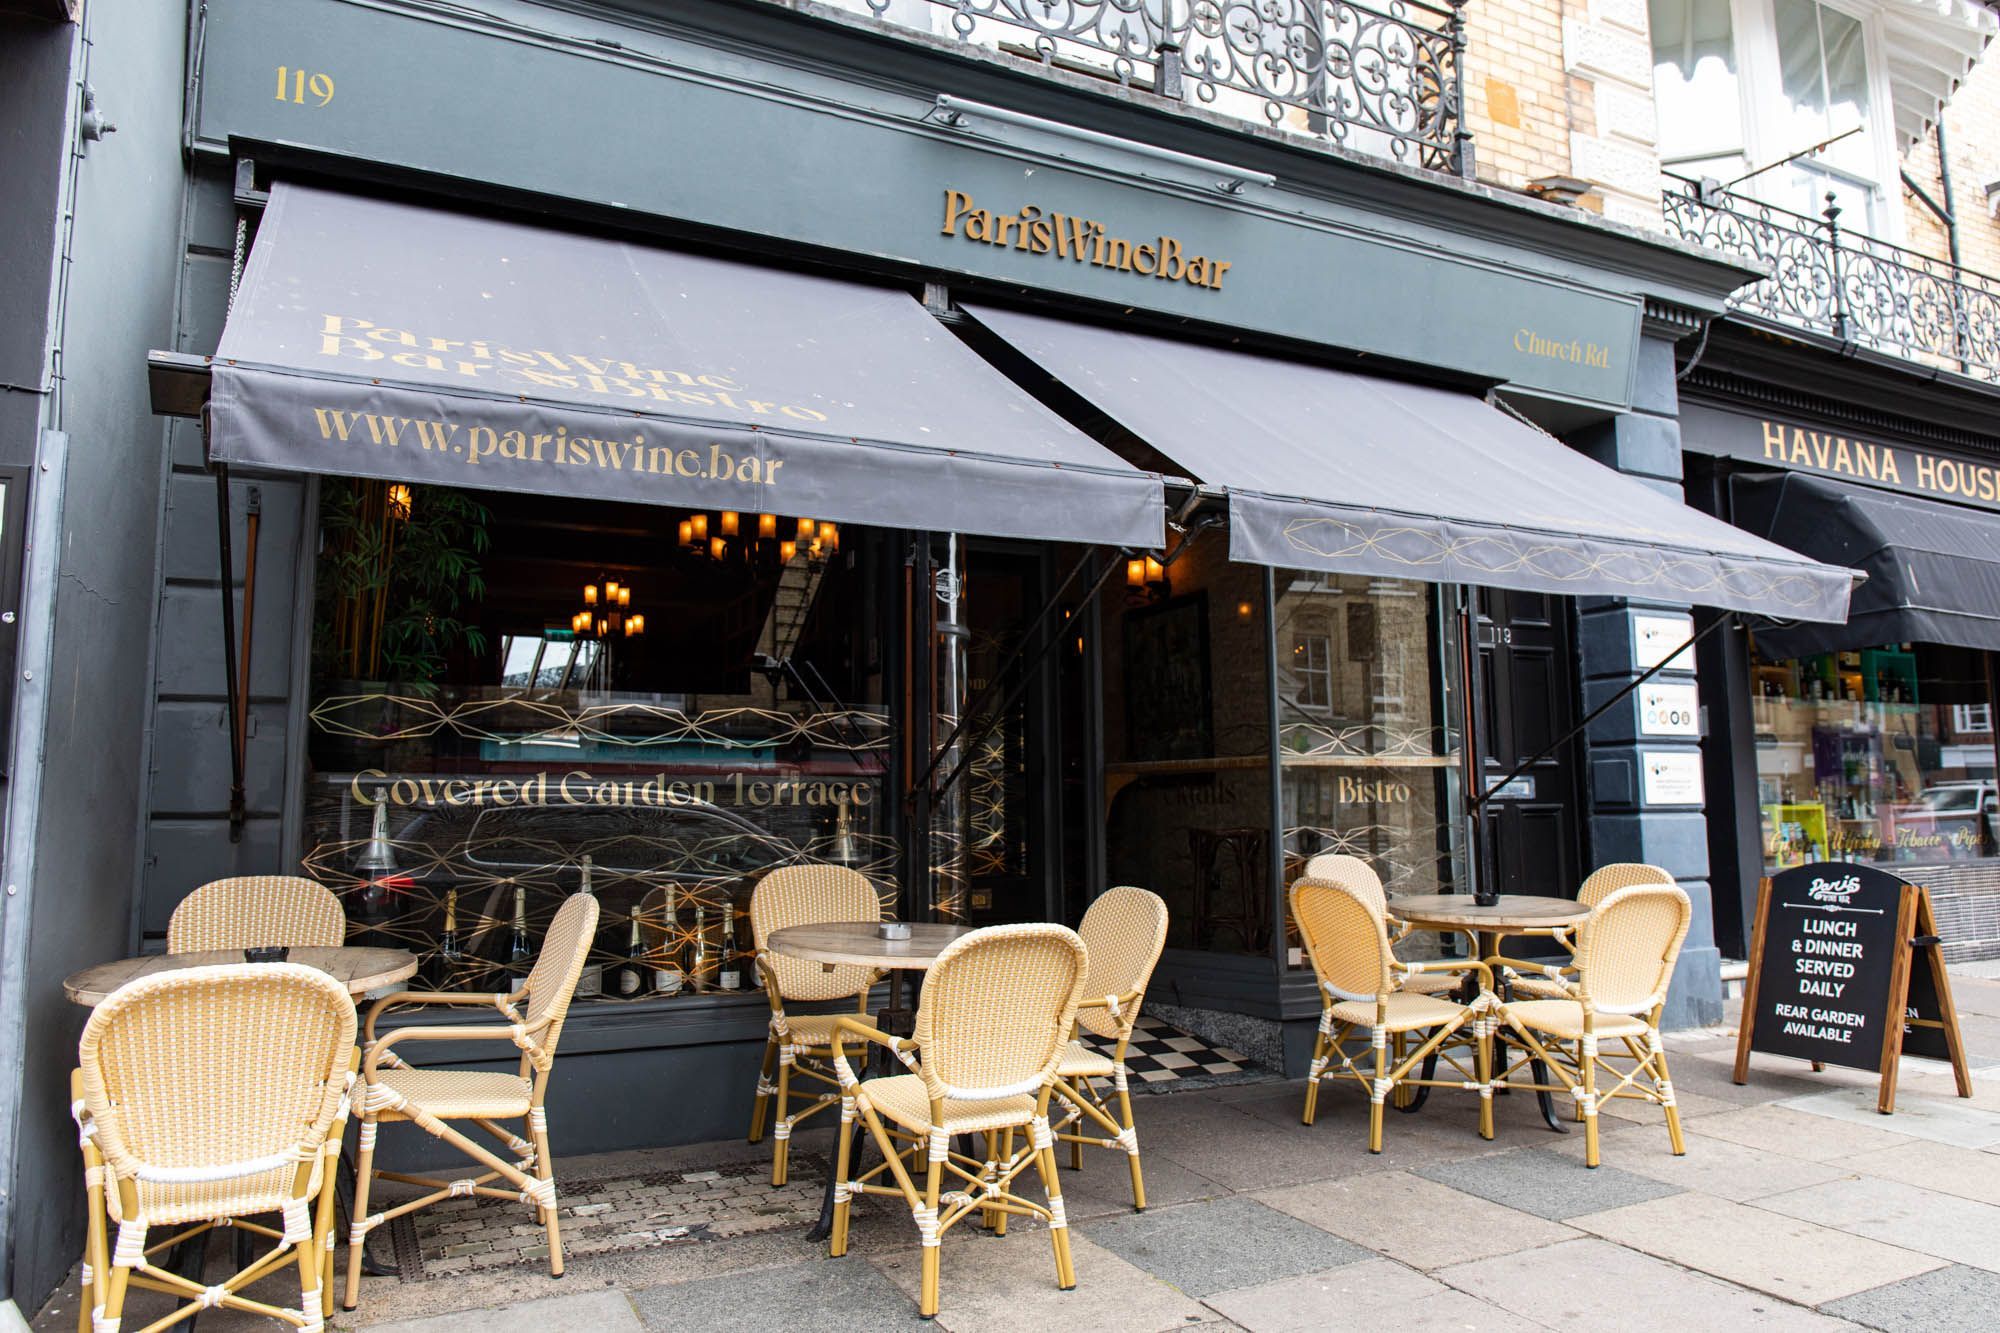 exterior shot of the Paris Wine bar - light brown wooden chairs and tables